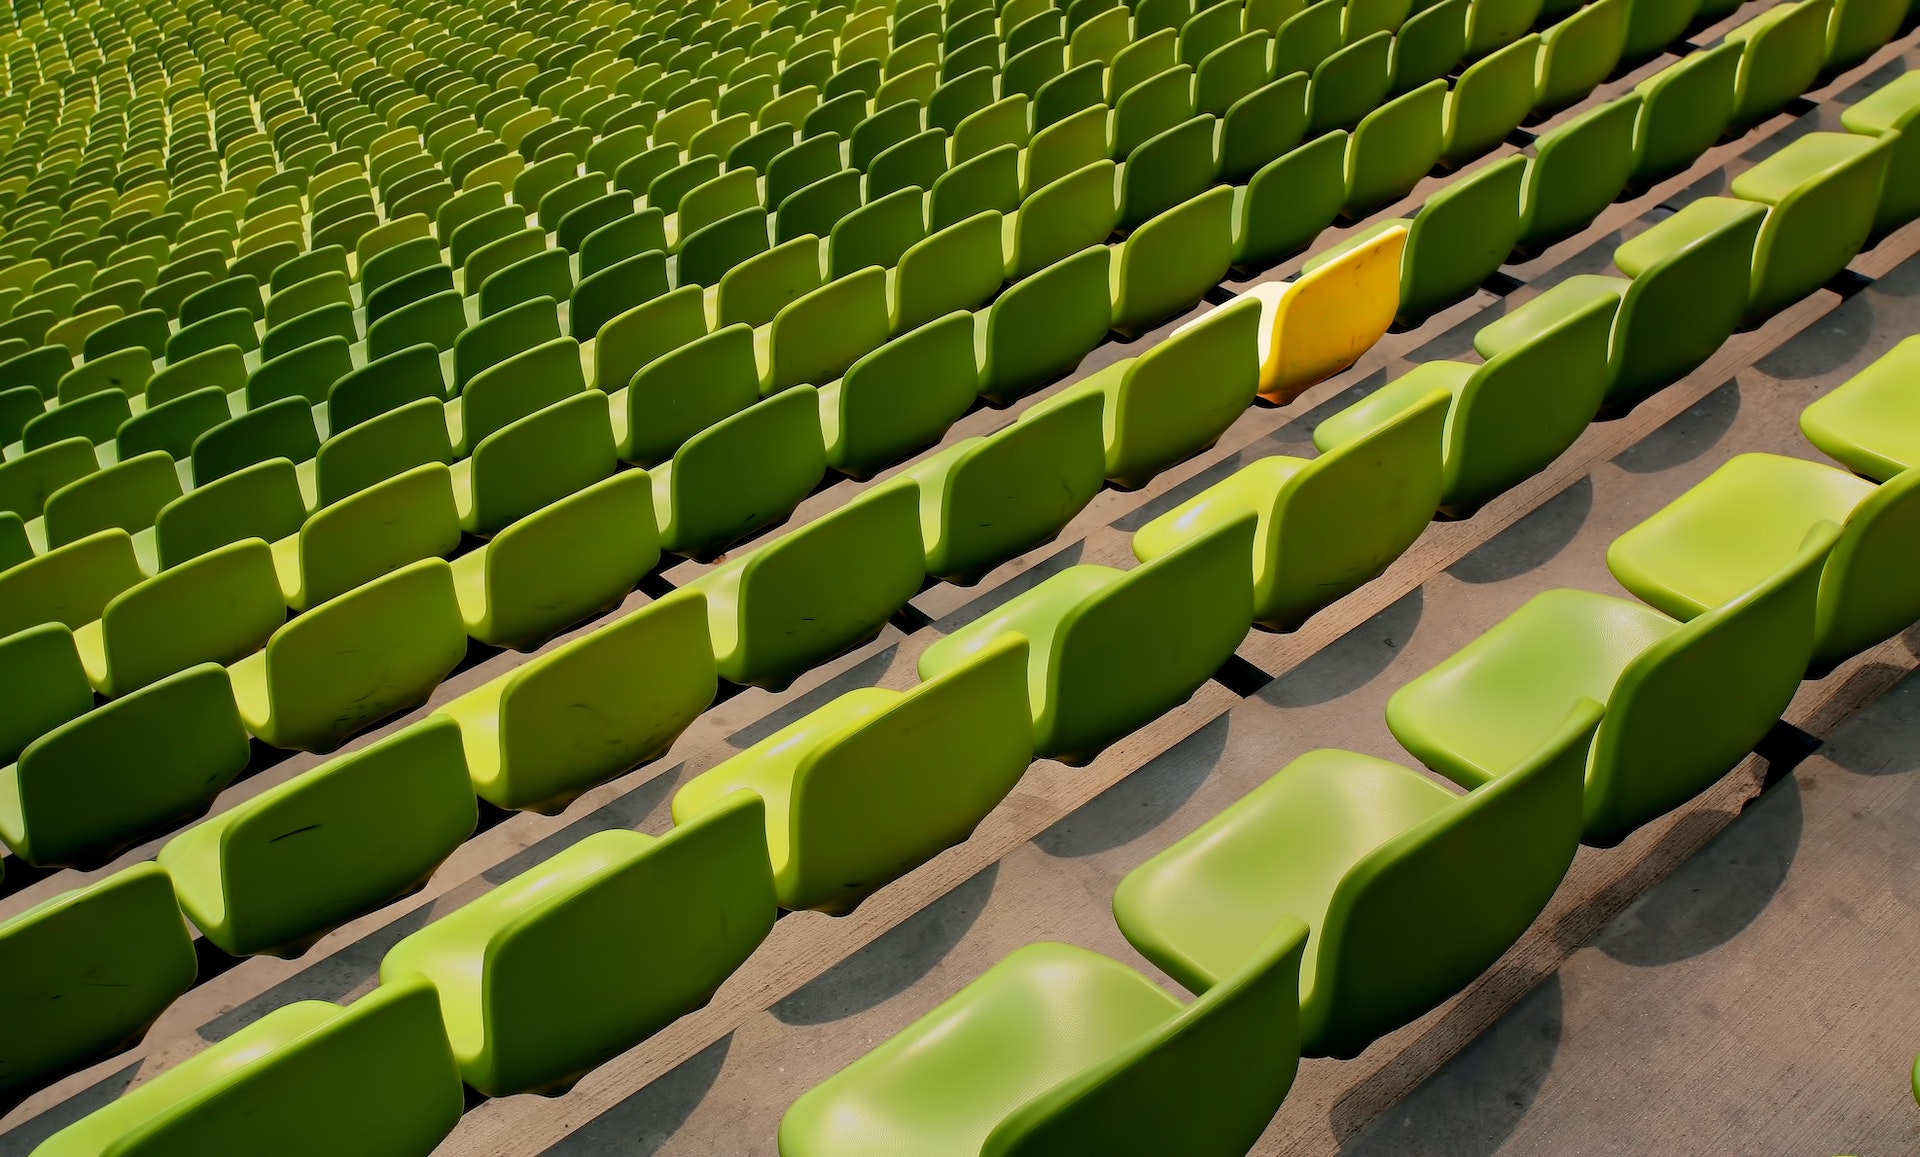 A single yellow chair among a sea of green chairs.